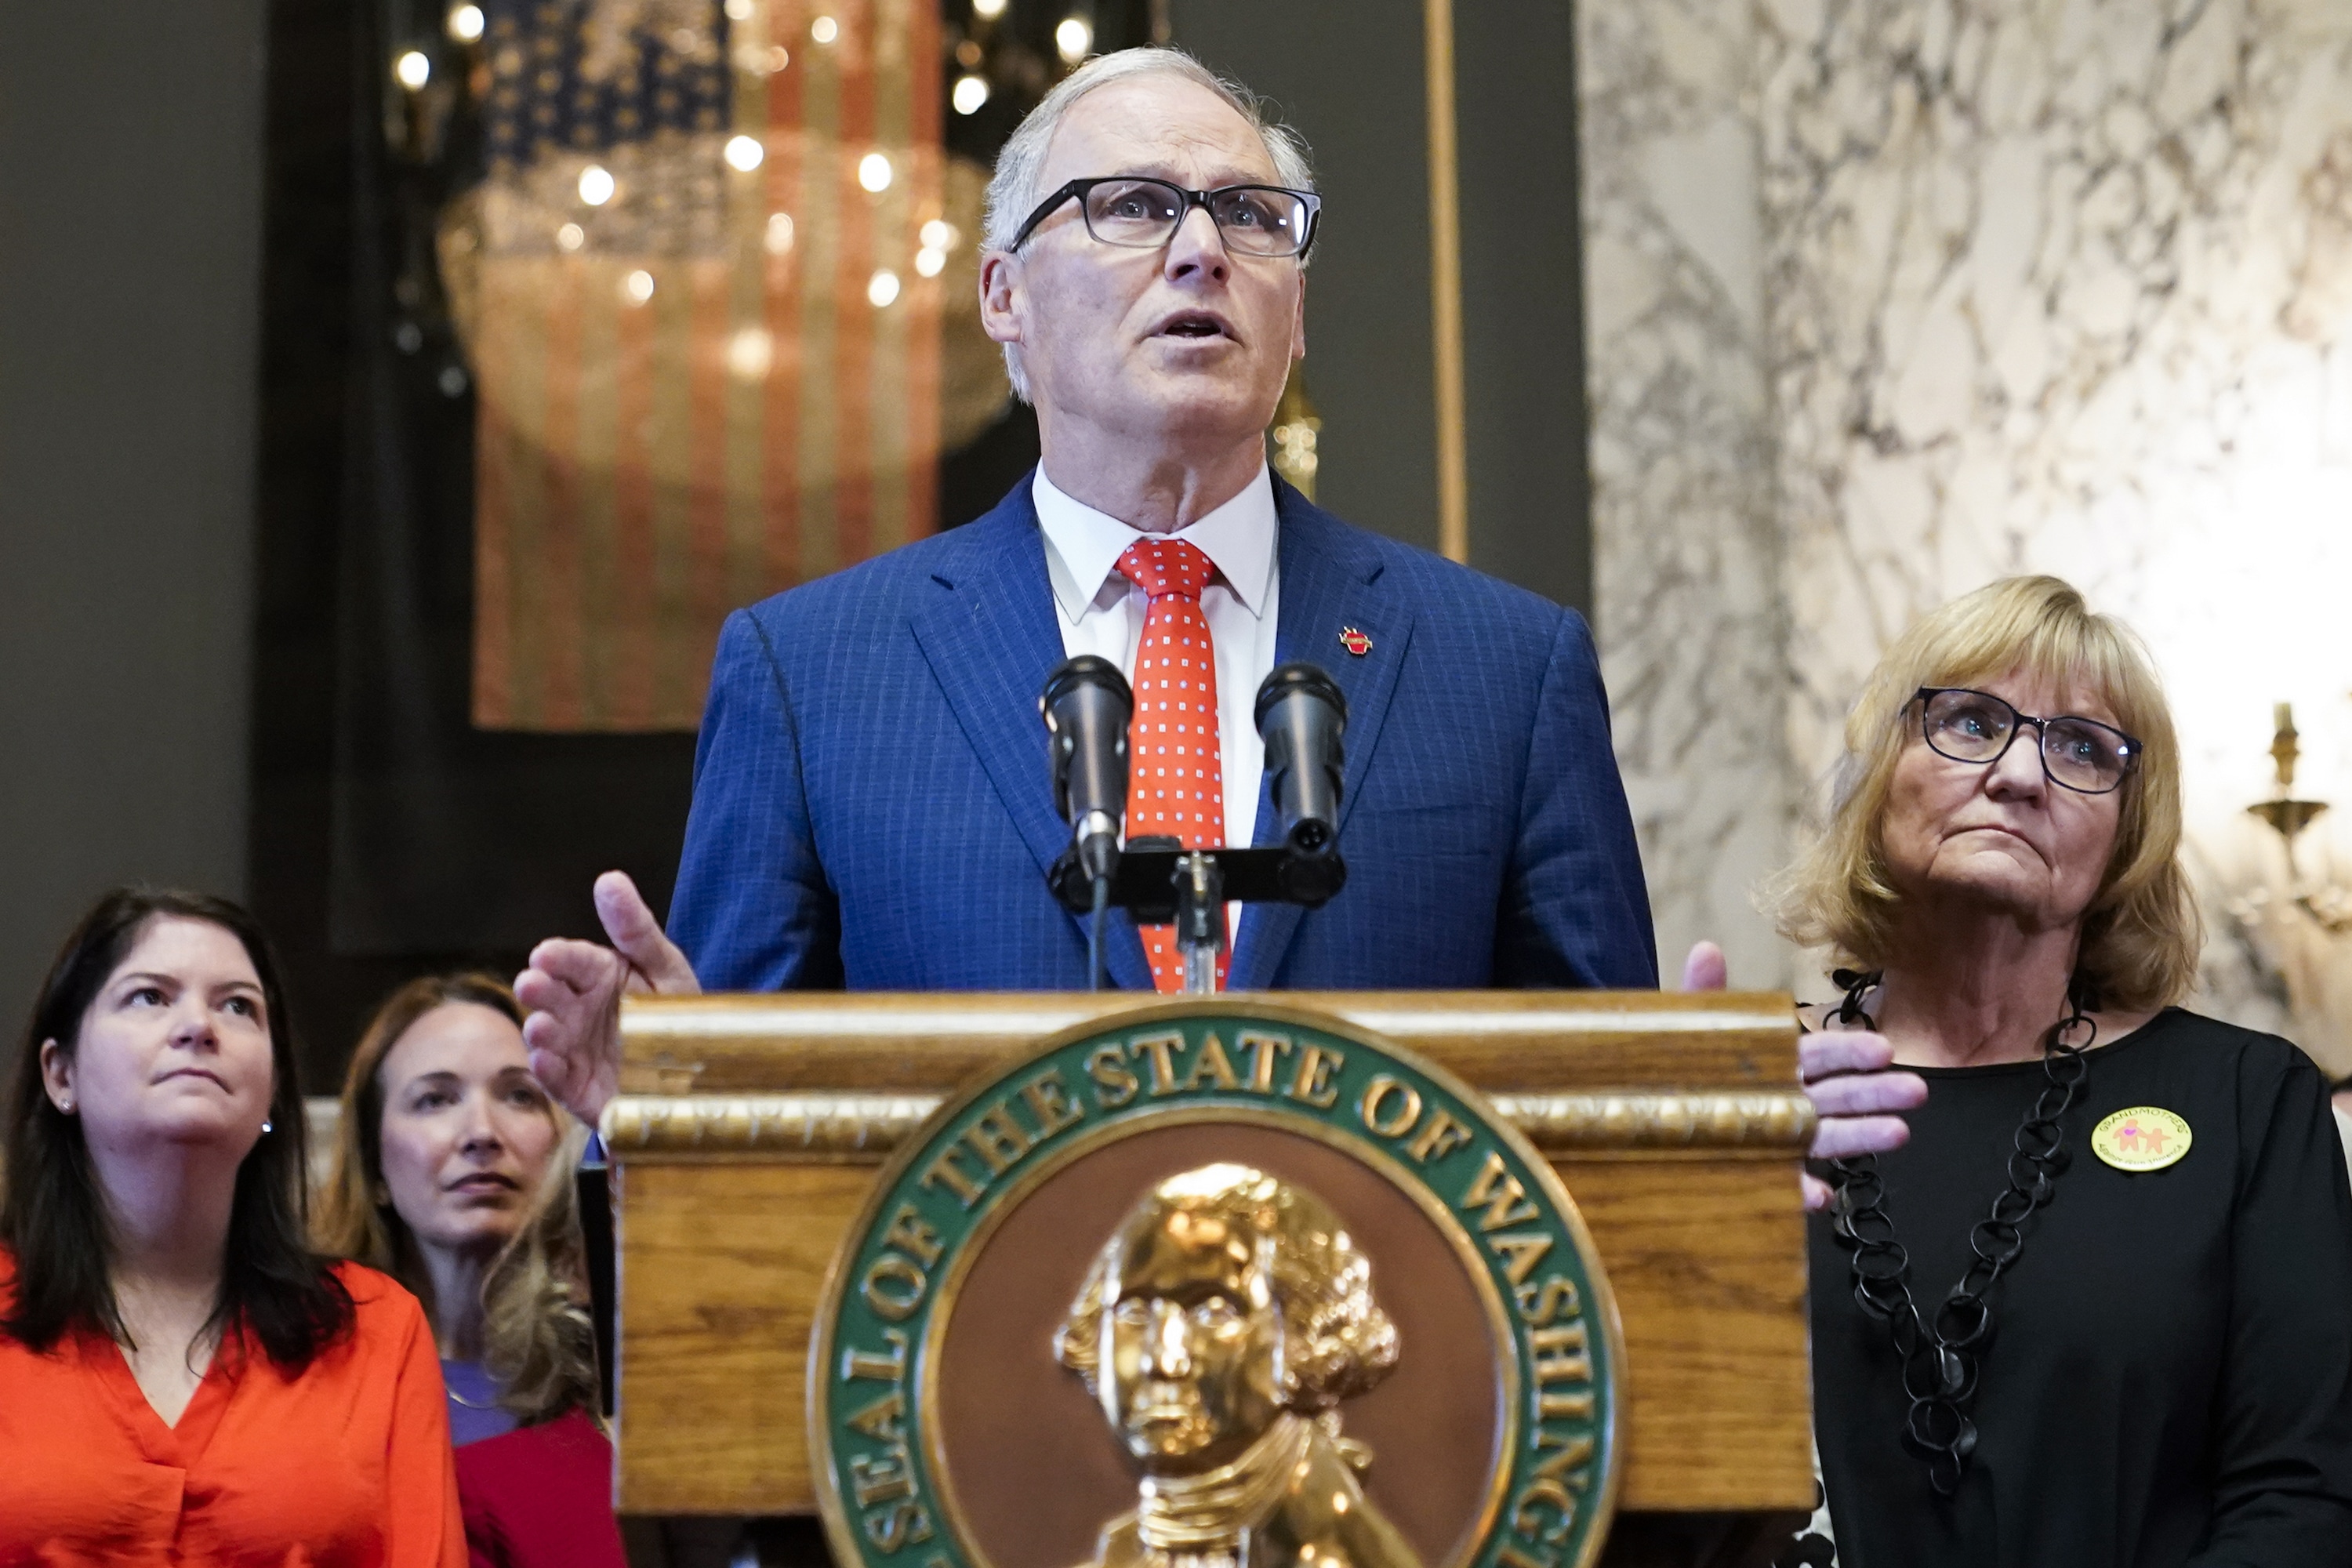 Governor Jay Inslee of Washington state tapping out after current term